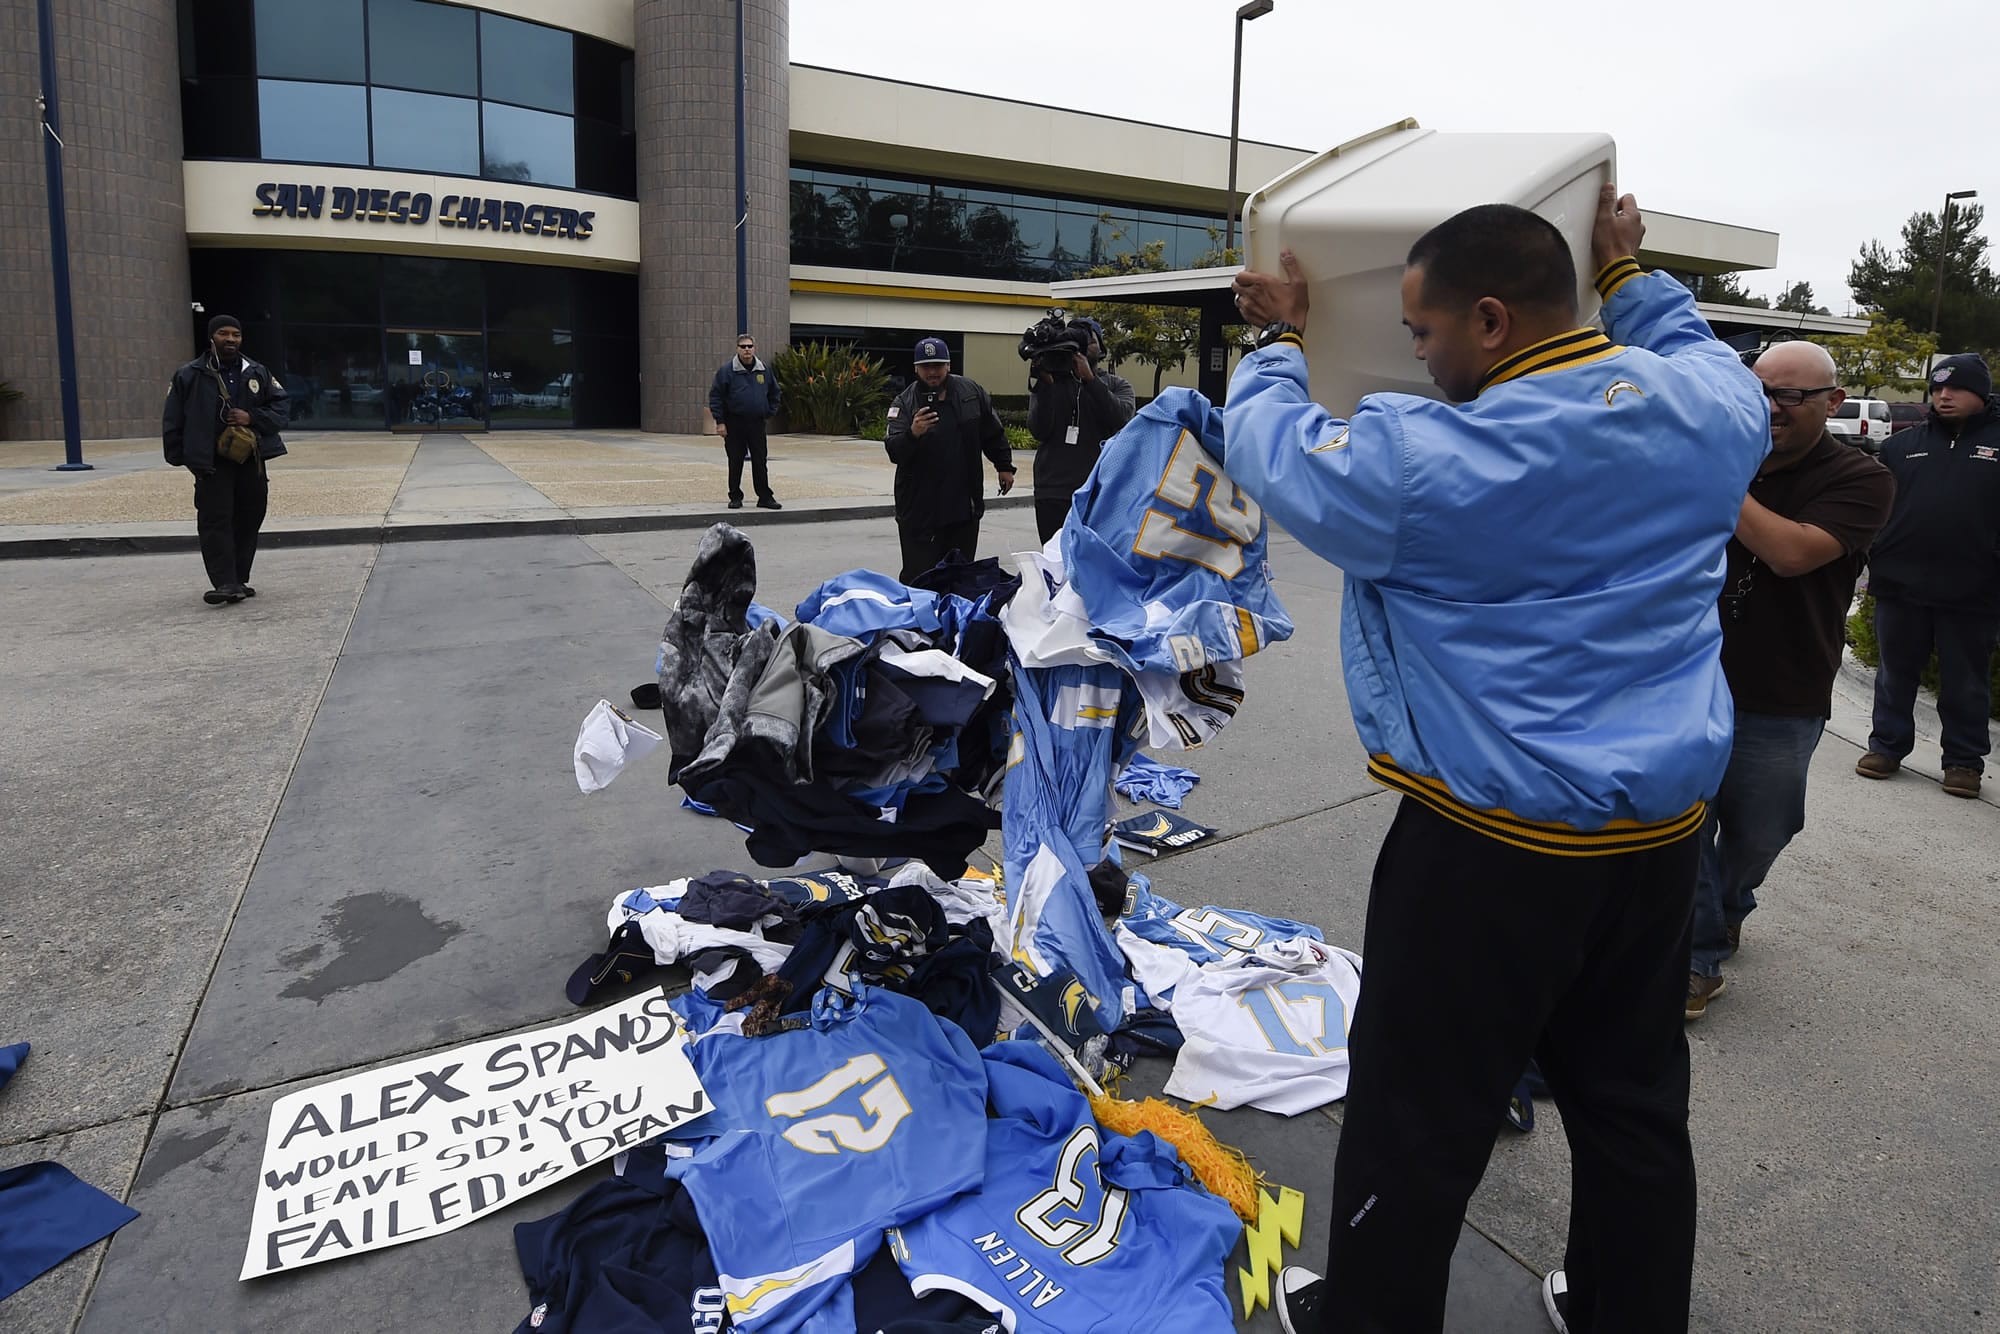 A former Chargers fan dumps memorabilia in front of of the San Diego Chargers headquarters after the team announced that it will move to Los Angeles,  Thursday Jan. 12, 2017, in San Diego.